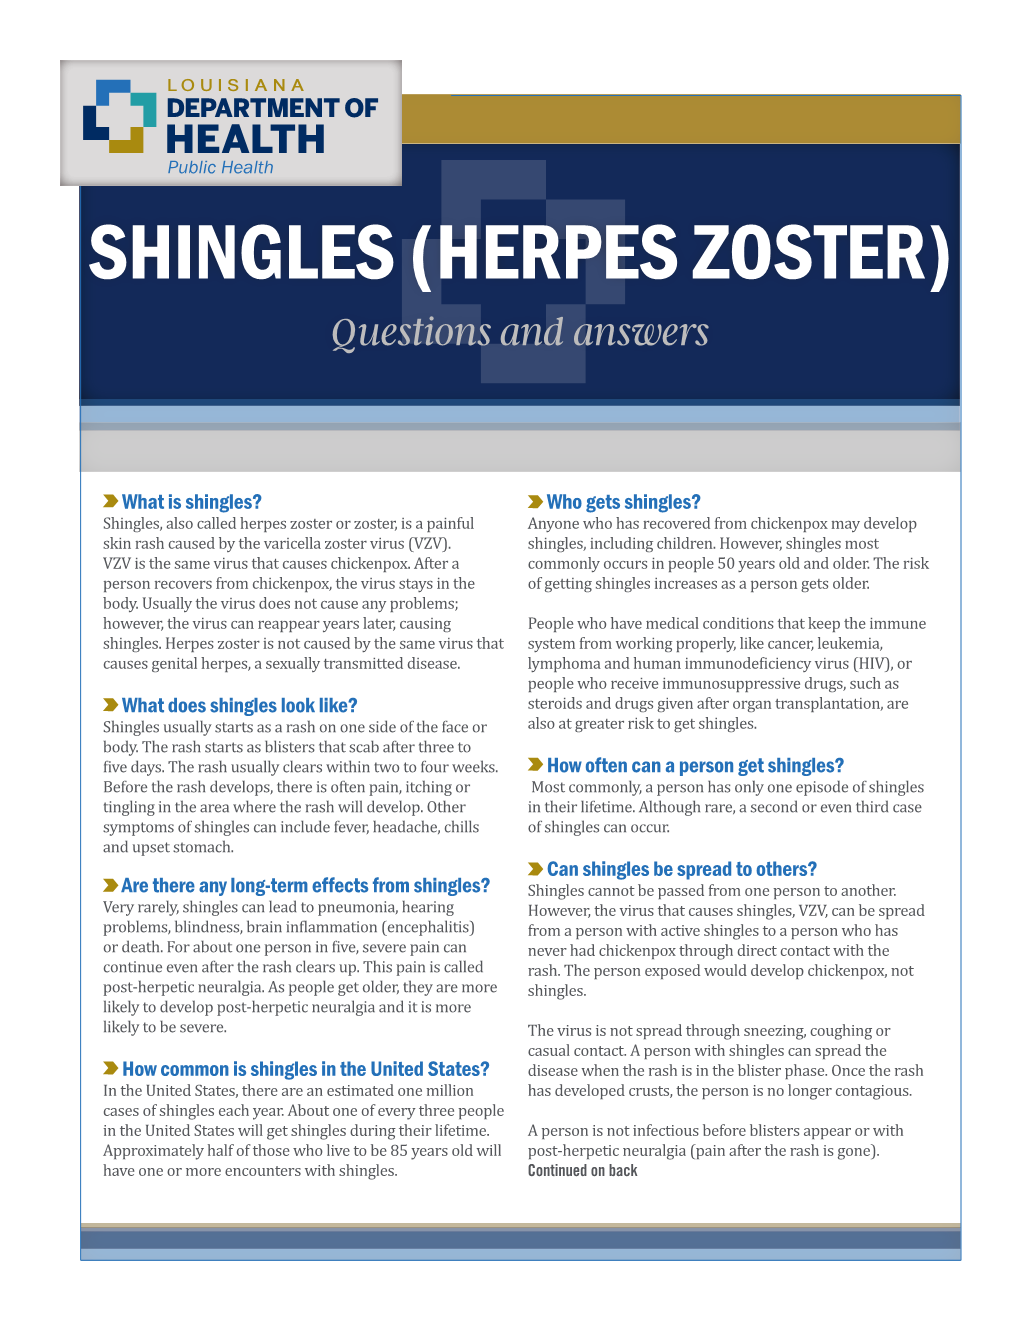 SHINGLES (HERPES ZOSTER) Questions and Answers